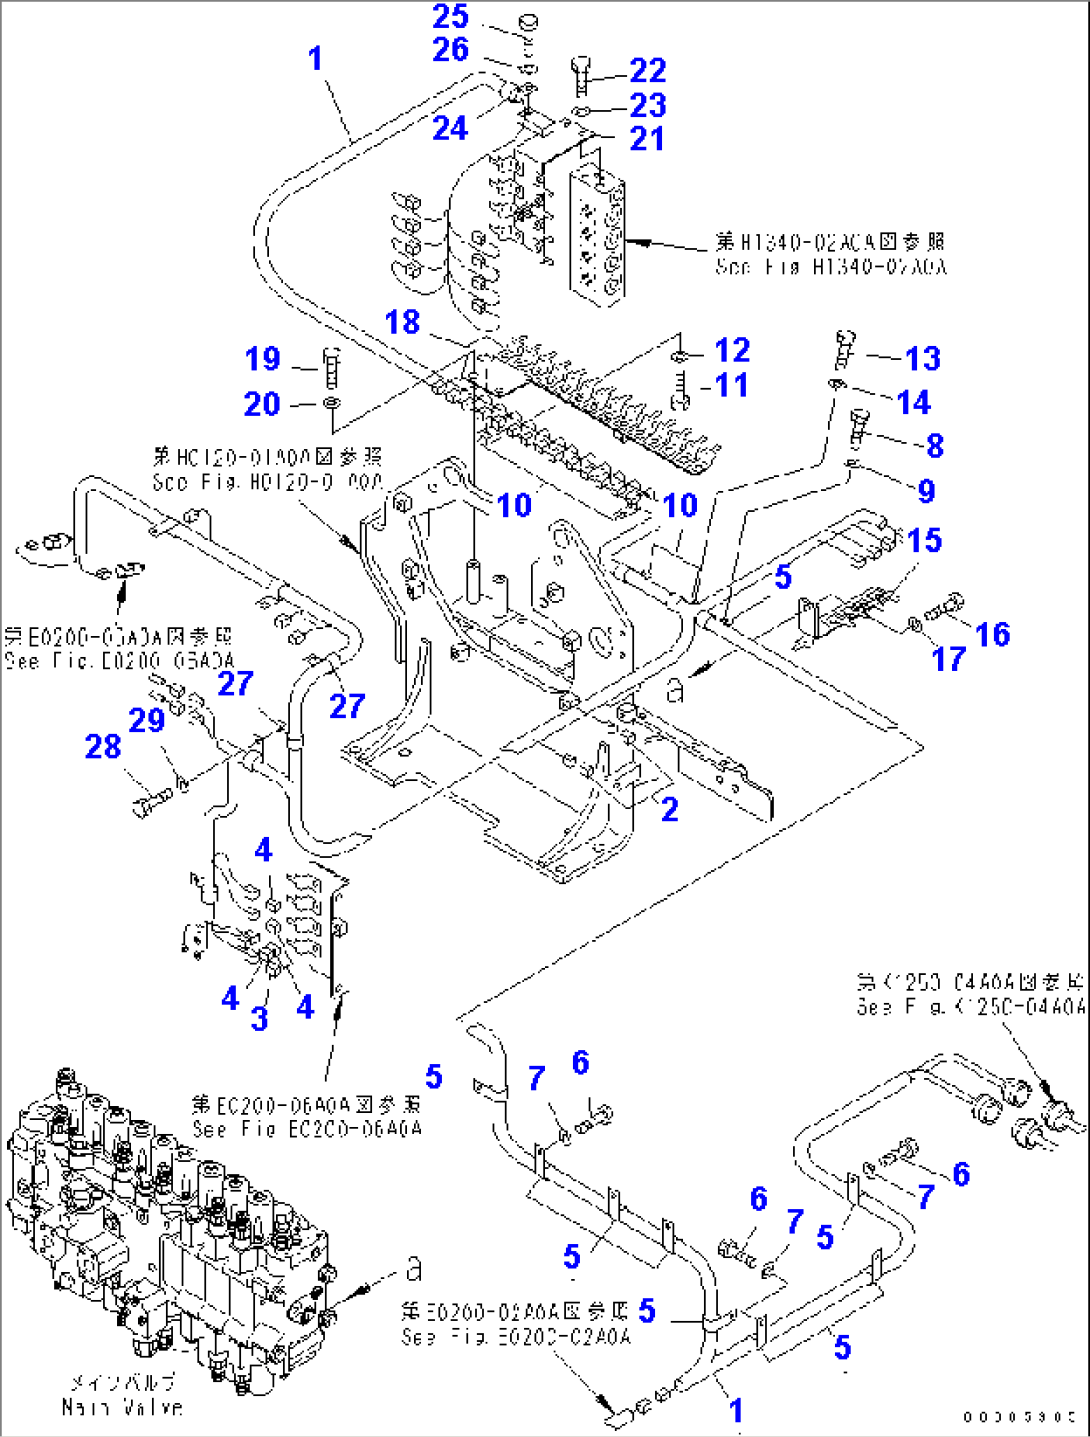 ELECTRICAL SYSTEM (VALVE HARNESS) (HARNESS)(#1006-)